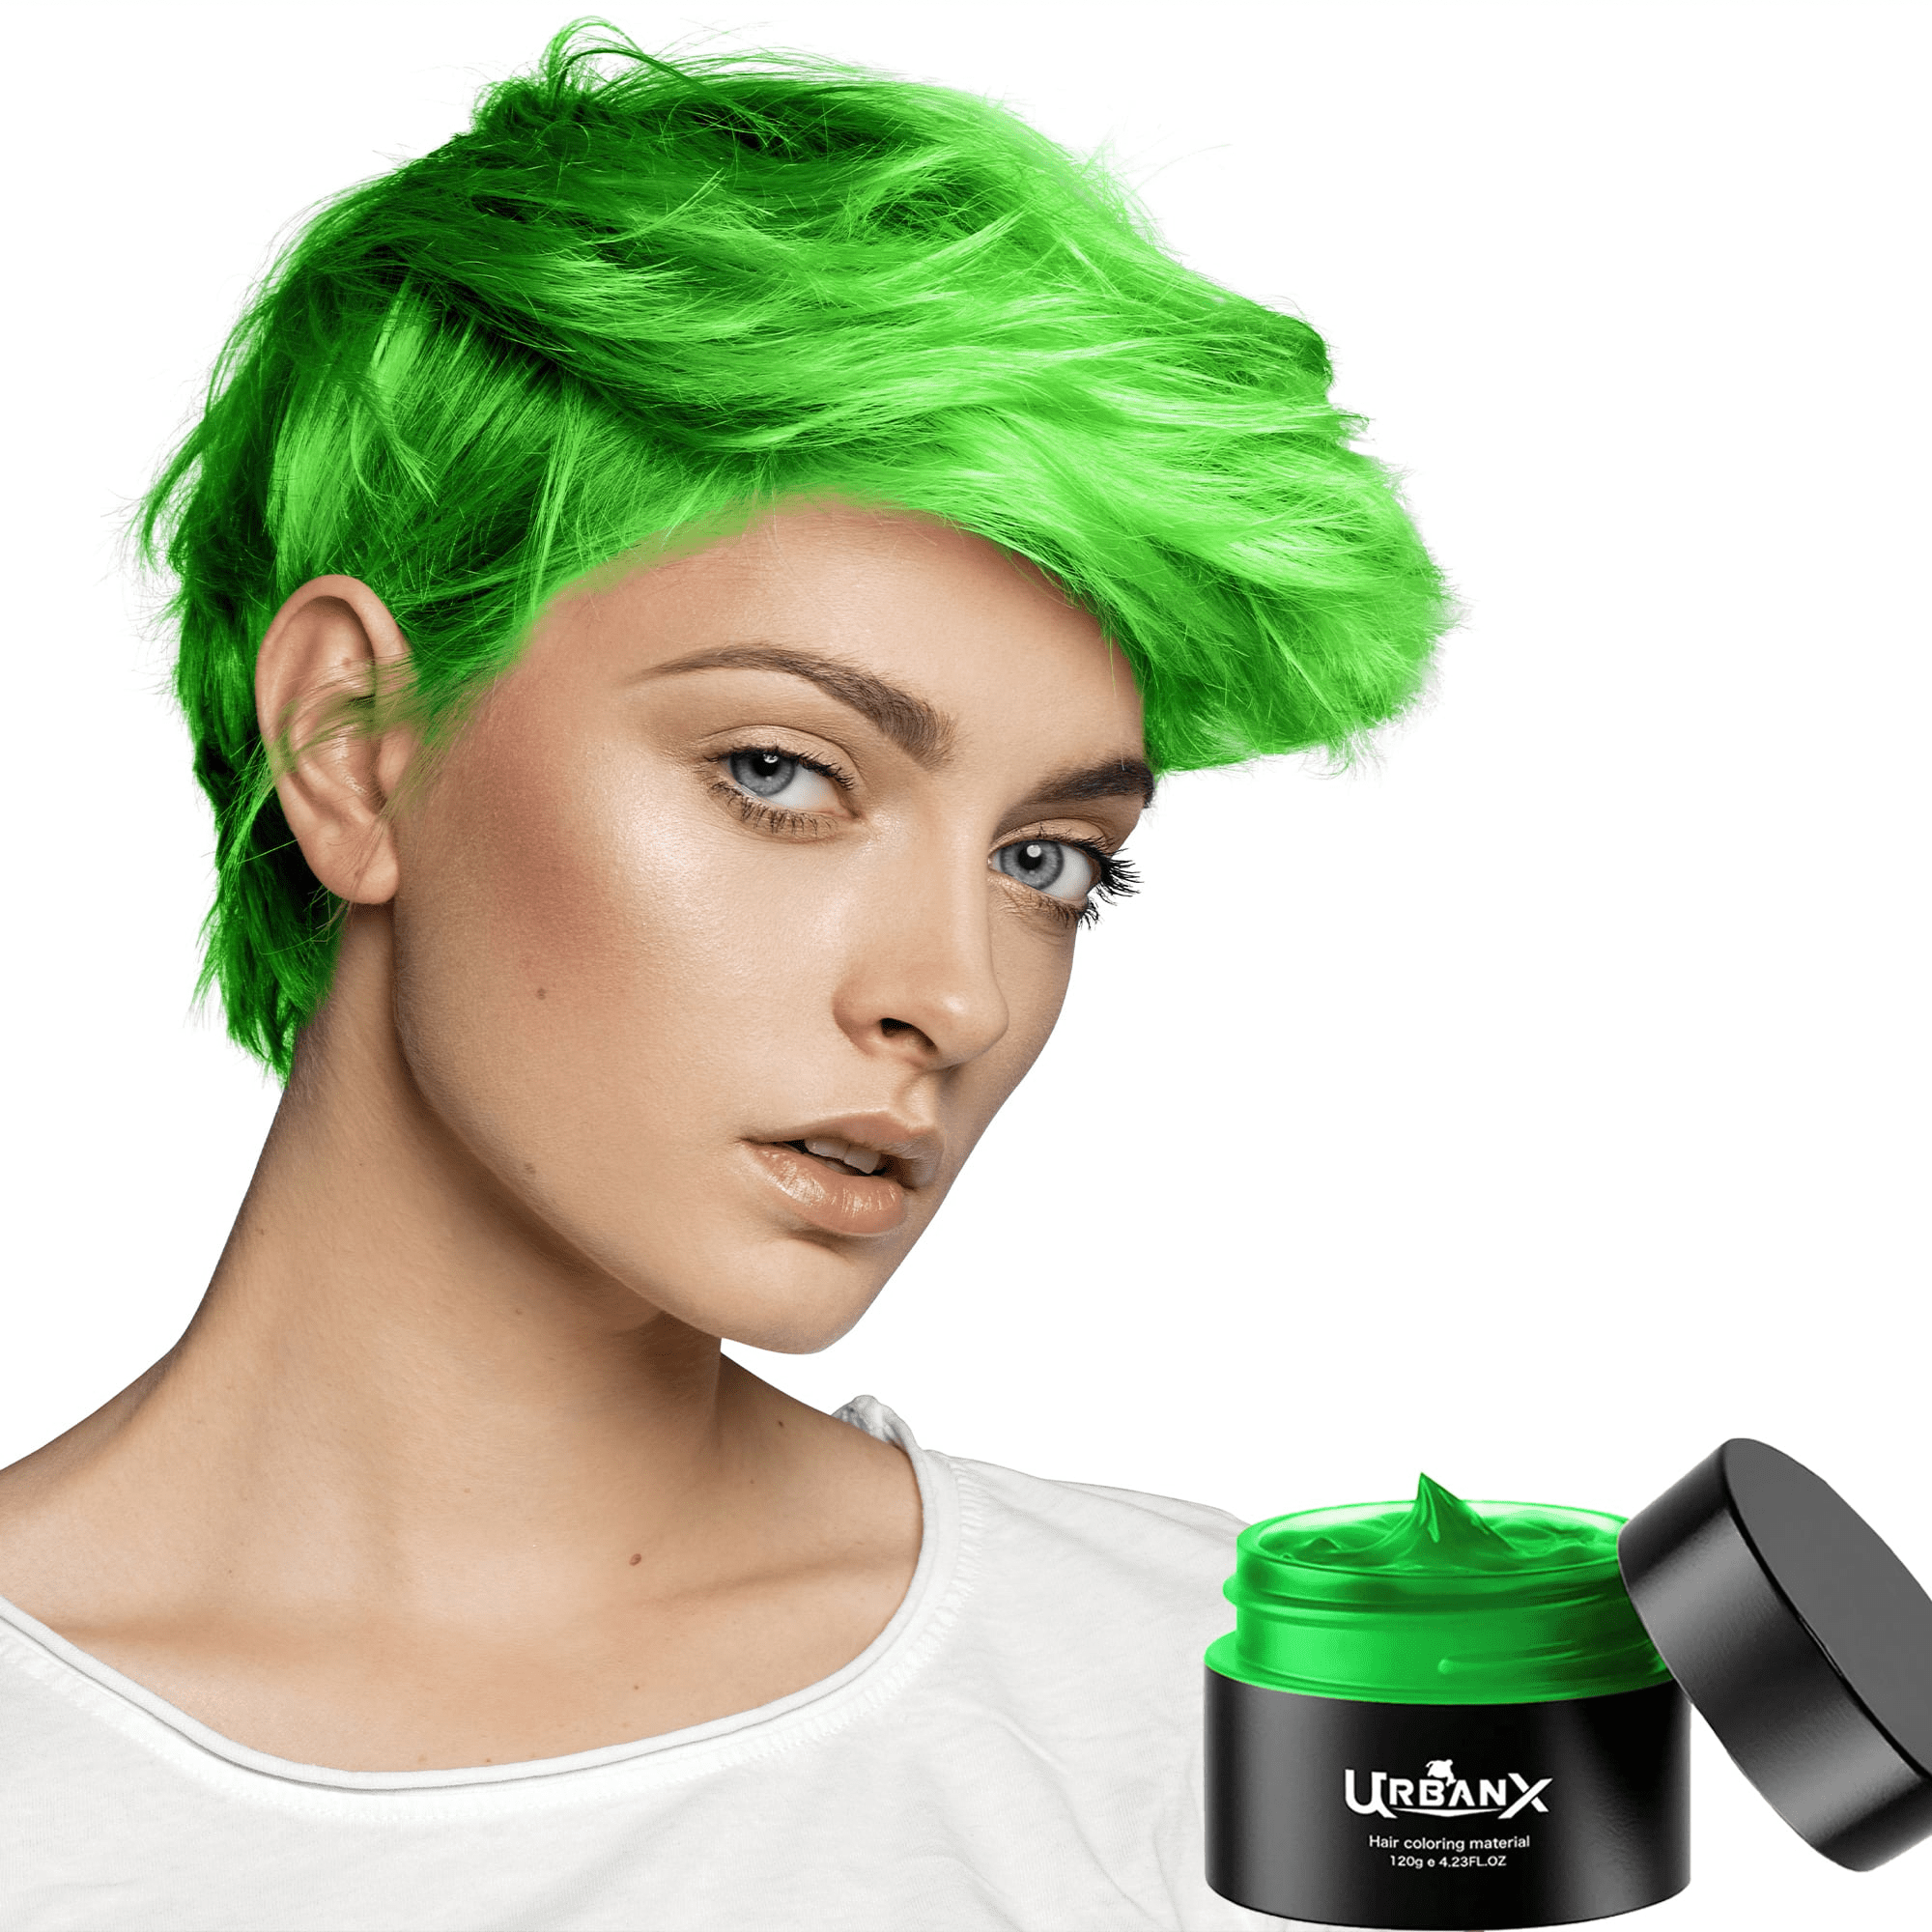 UrbanX Washable Hair Coloring Wax Material Unisex Color Dye Styling Cream  Natural Hairstyle for Short Hair Pomade Temporary Party Cosplay Natural  Ingredients - Green 